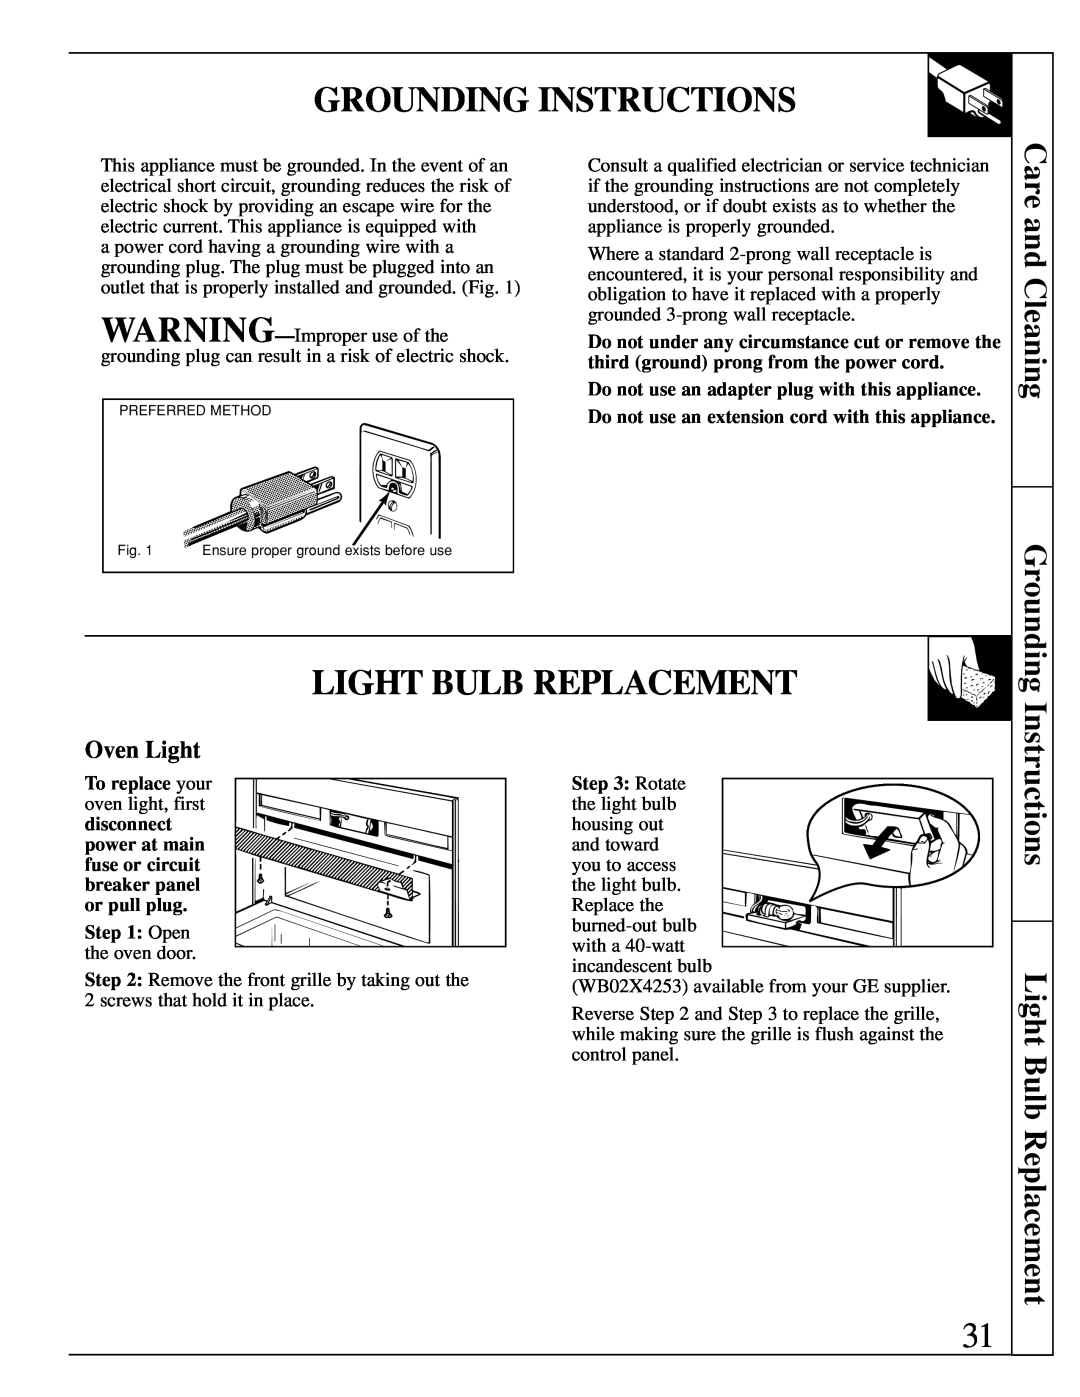 GE JEB1095 warranty Grounding Instructions, Care and Cleaning, Instructions Light Bulb Replacement, Oven Light 